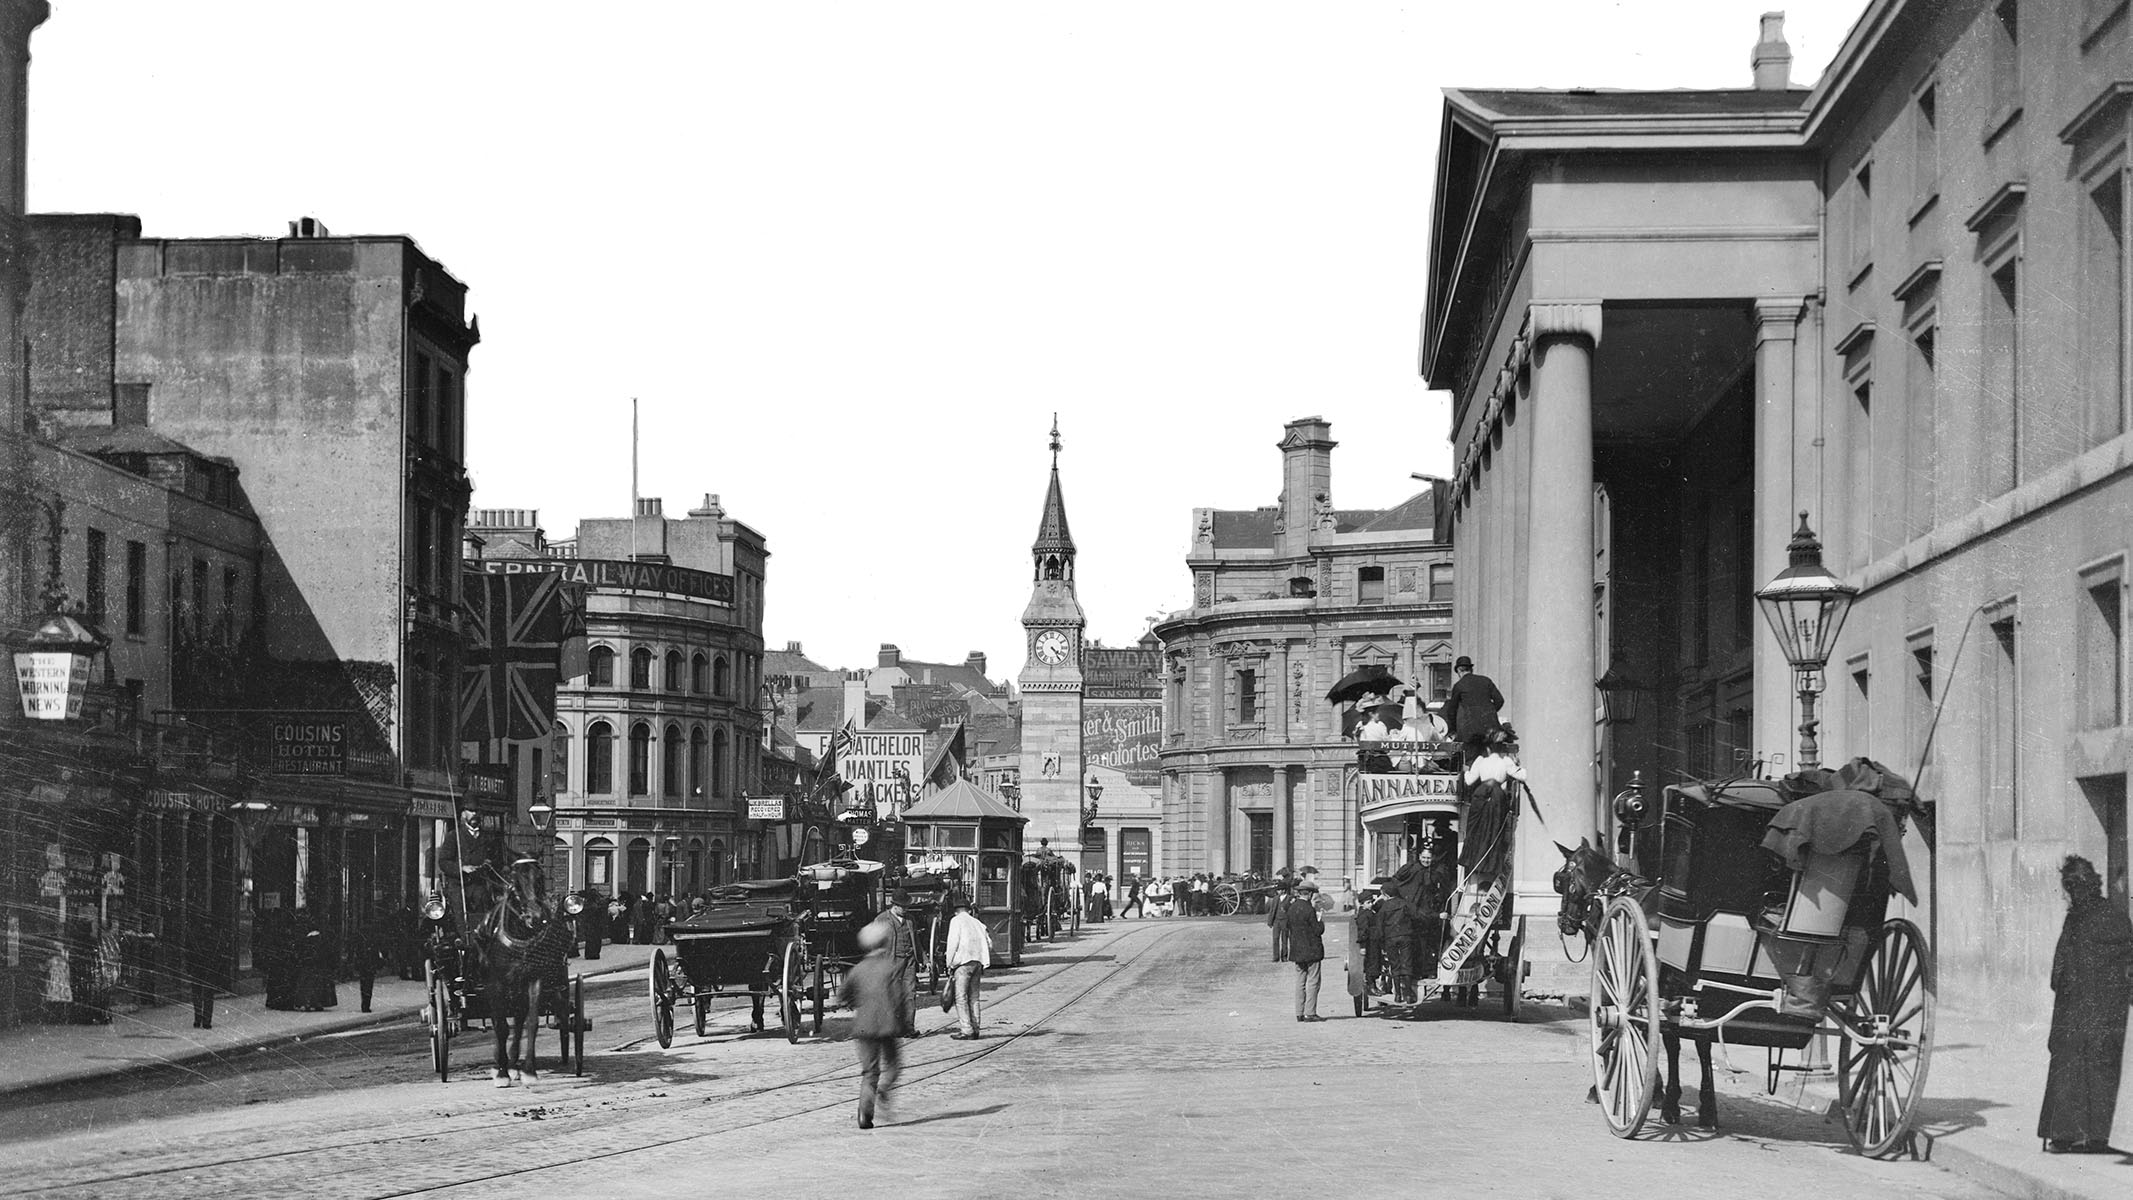 Black and white archive photograph of a busy street scene.